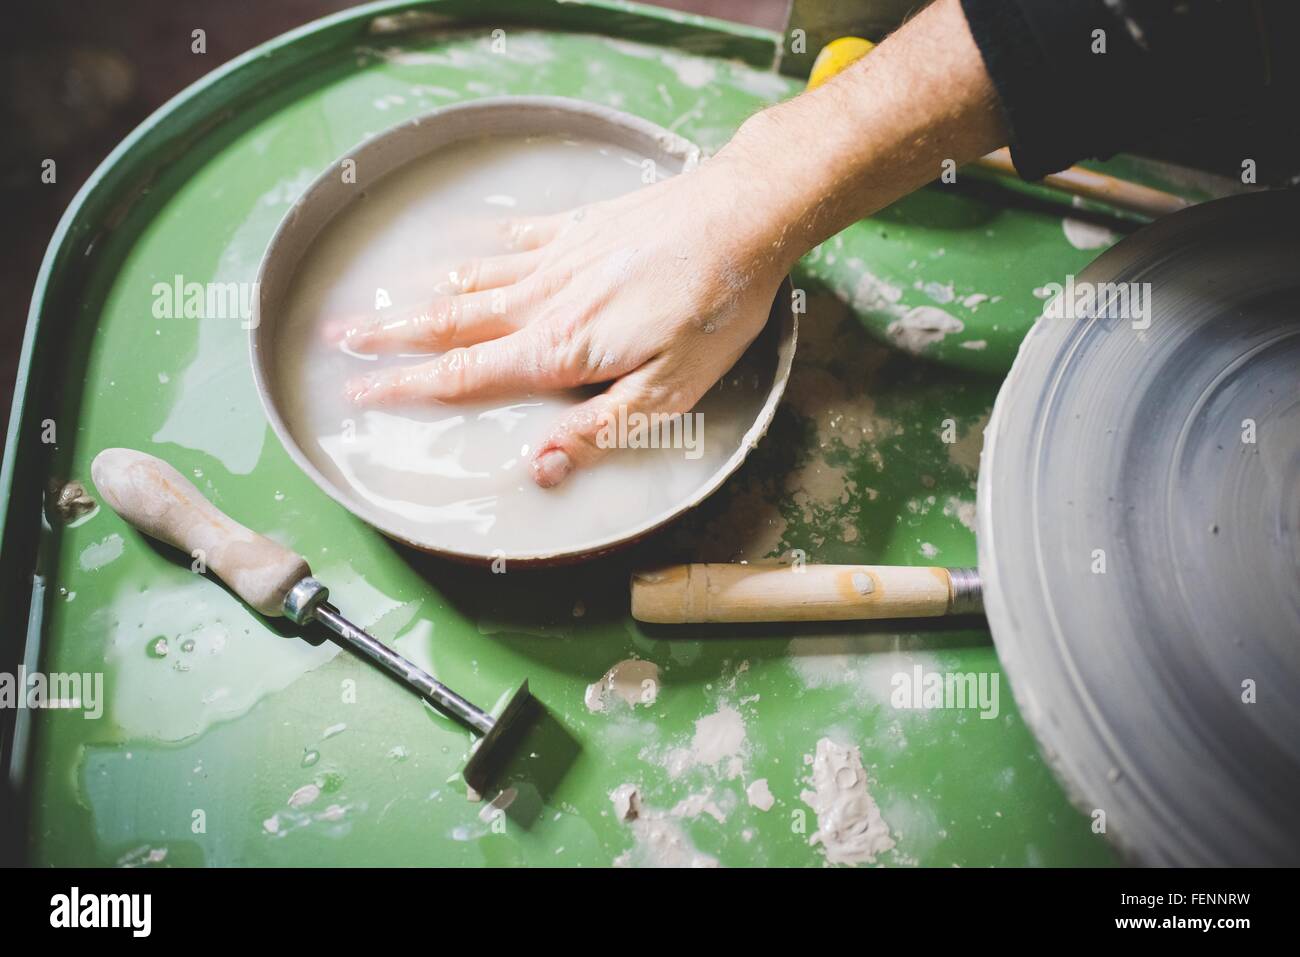 Mid adult mans hand immersed in bowl of water on pottery wheel Stock Photo